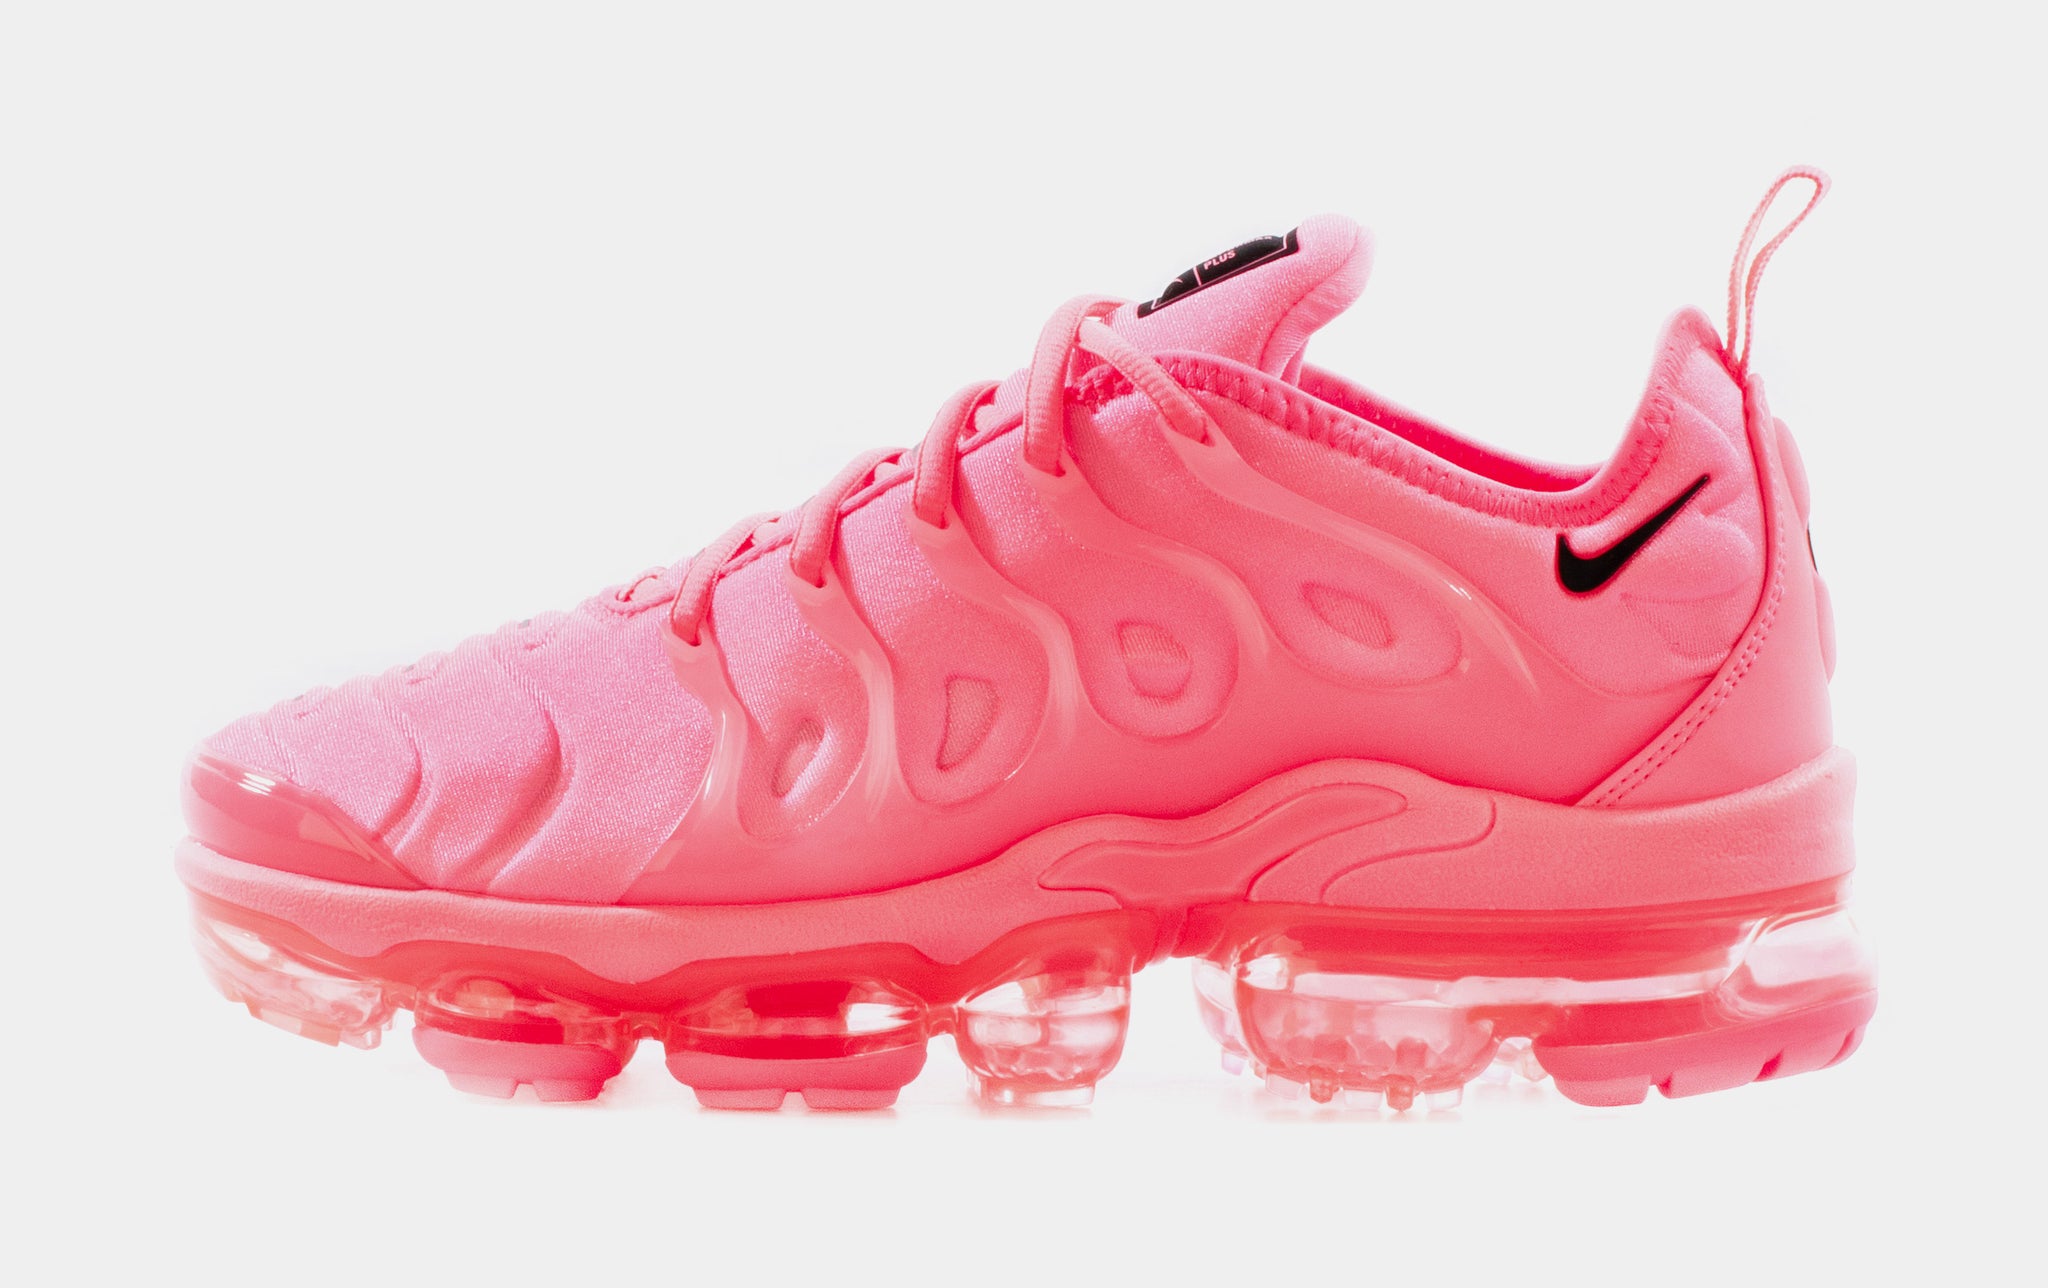 vapormax with pink bottom